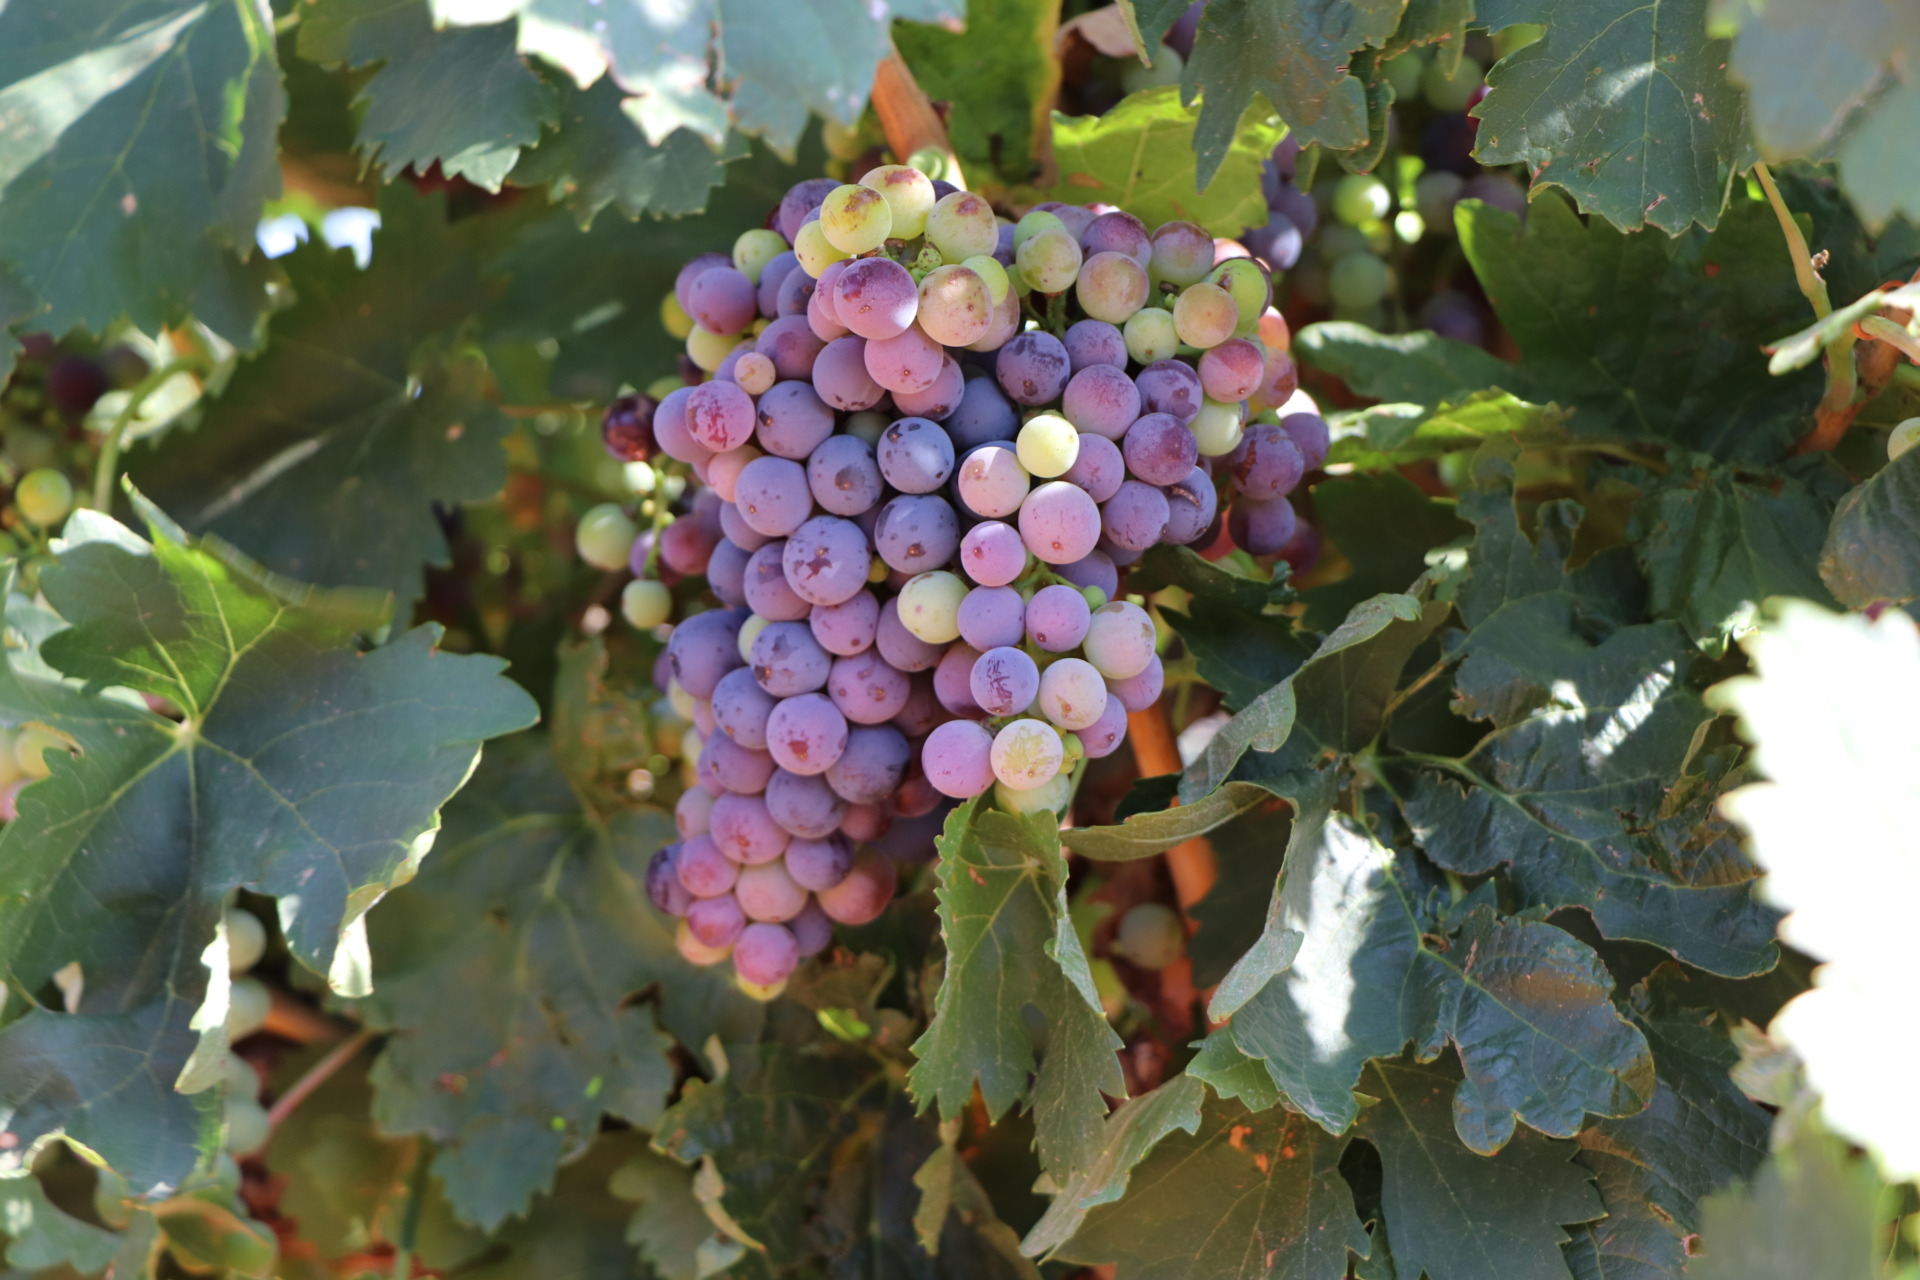 Texas A&M AgriLife tapped to gather grape crush report